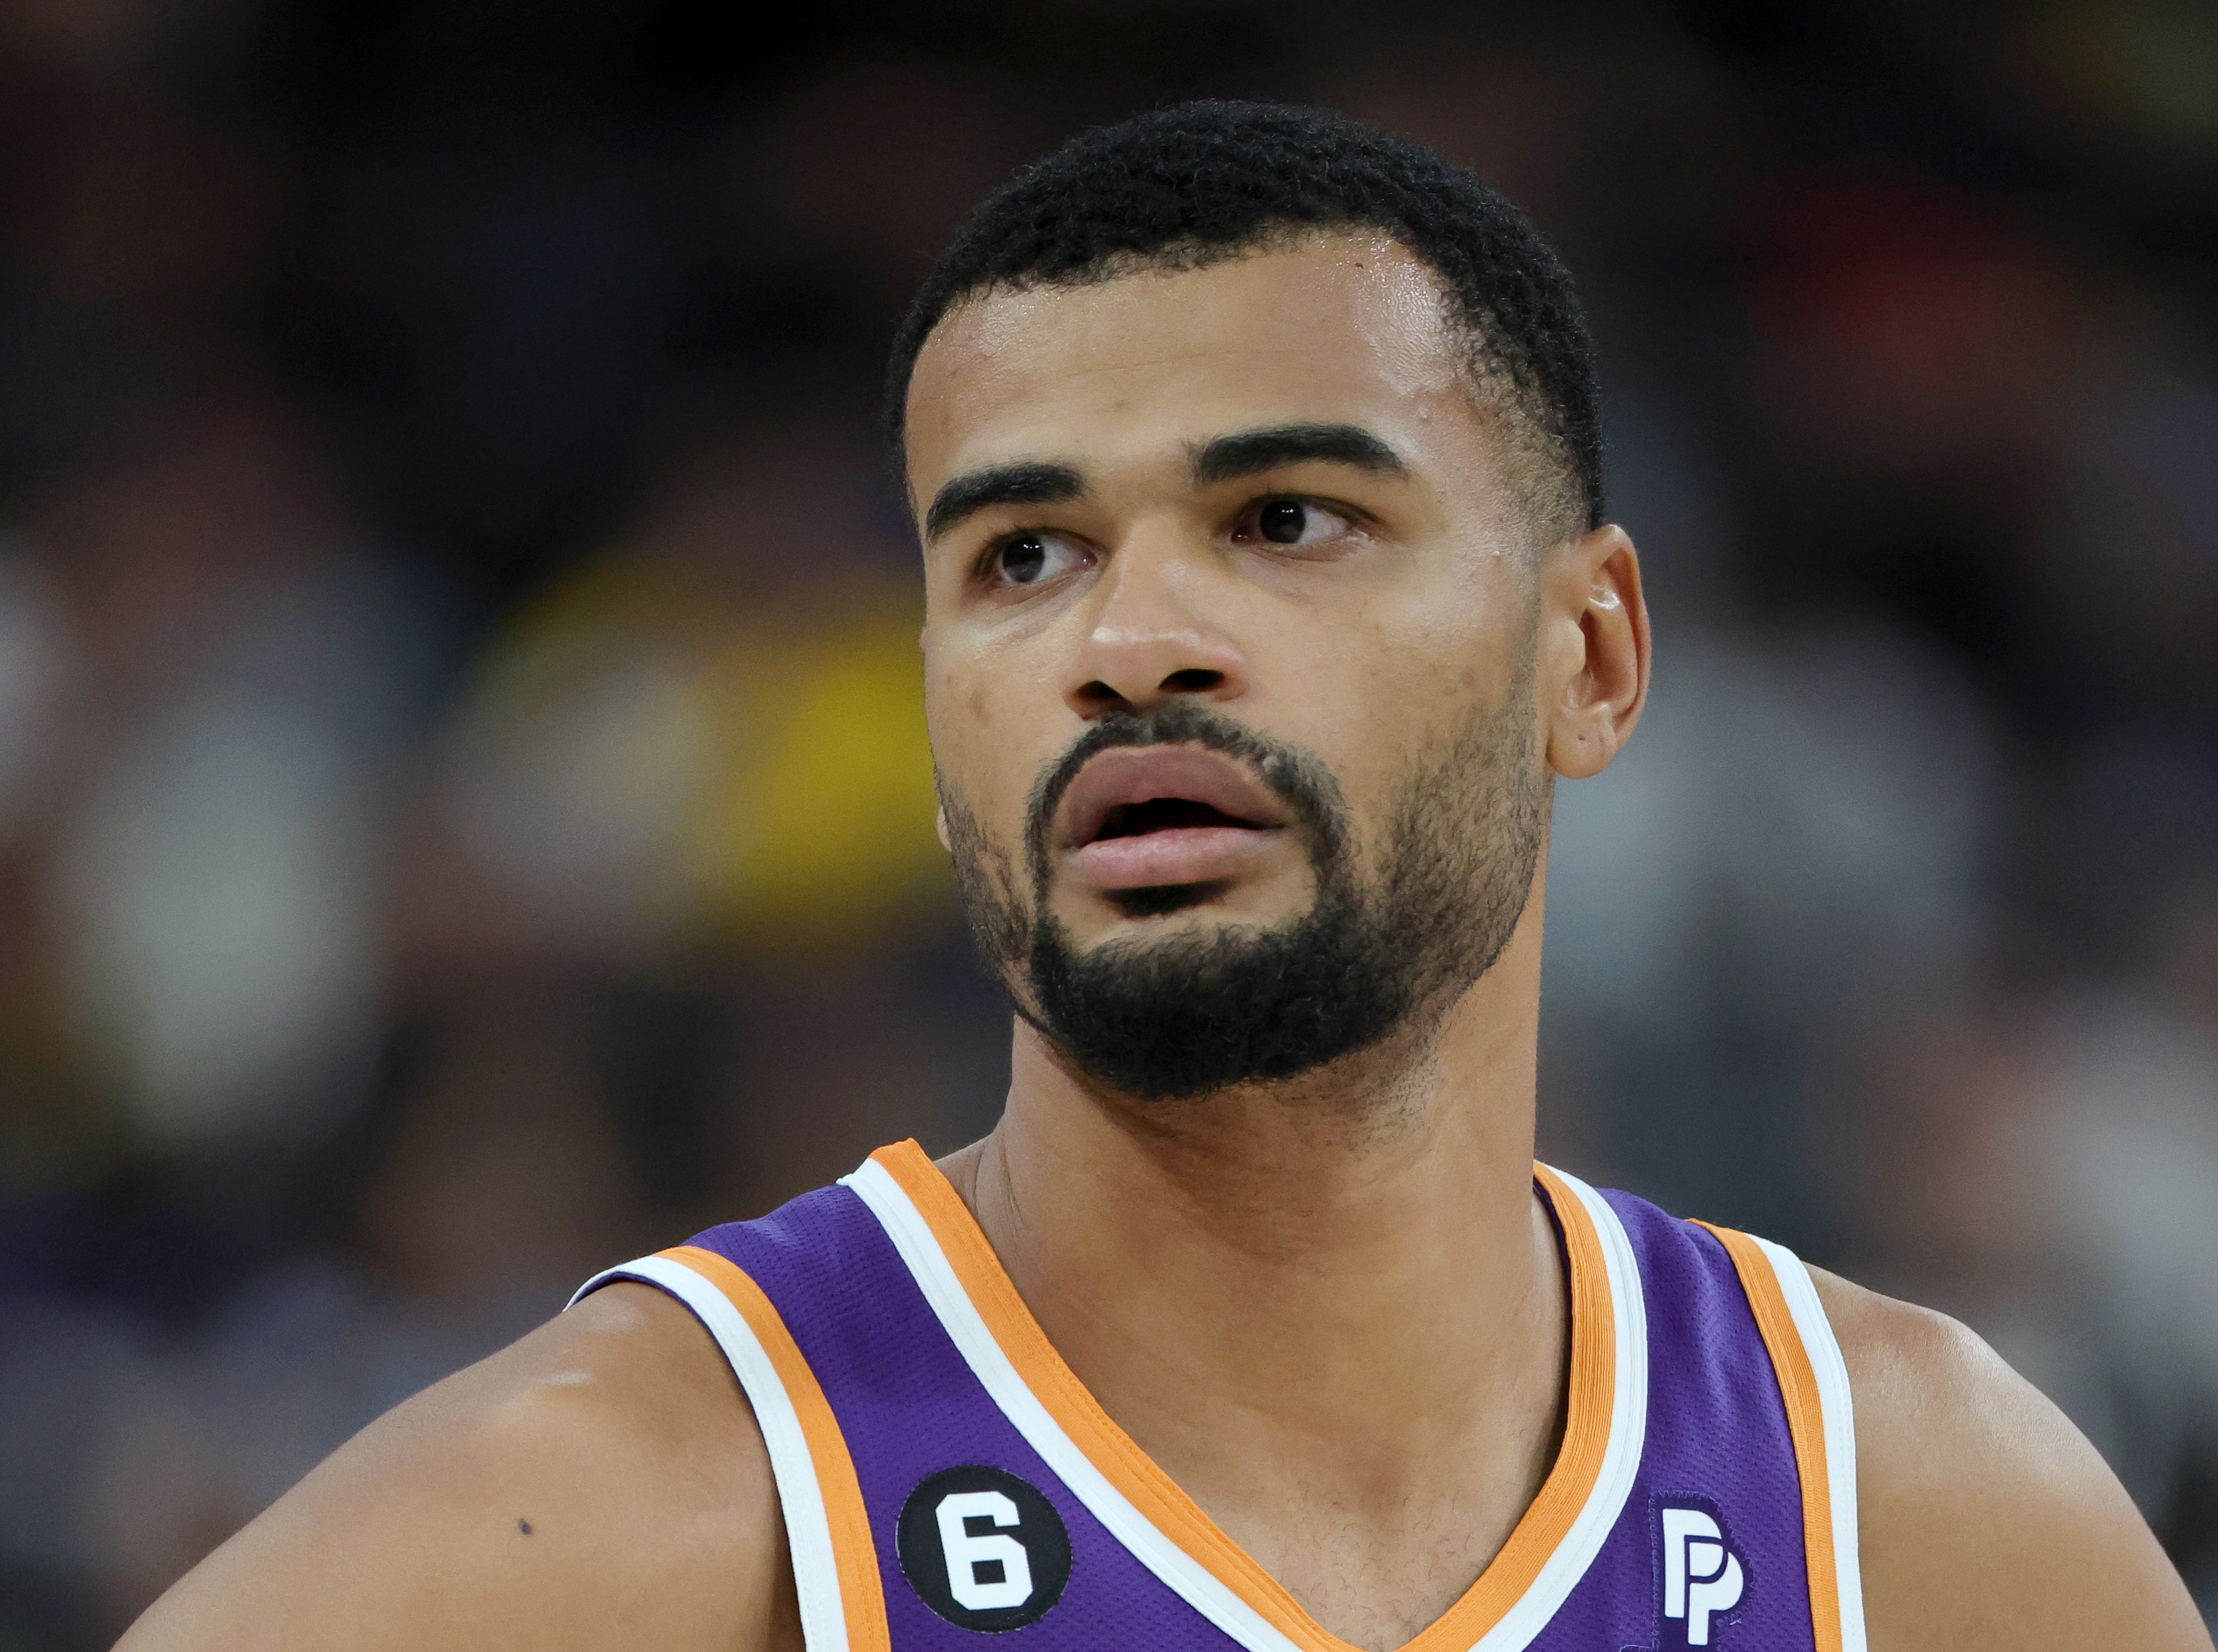 Timothe Luwawu-Cabarrot #8 of the Phoenix Suns stands on the court during a break in the third quarter of a preseason game against the Los Angeles Lakers at T-Mobile Arena on October 05, 2022 in Las Vegas, Nevada. The Suns defeated the Lakers 119-115.